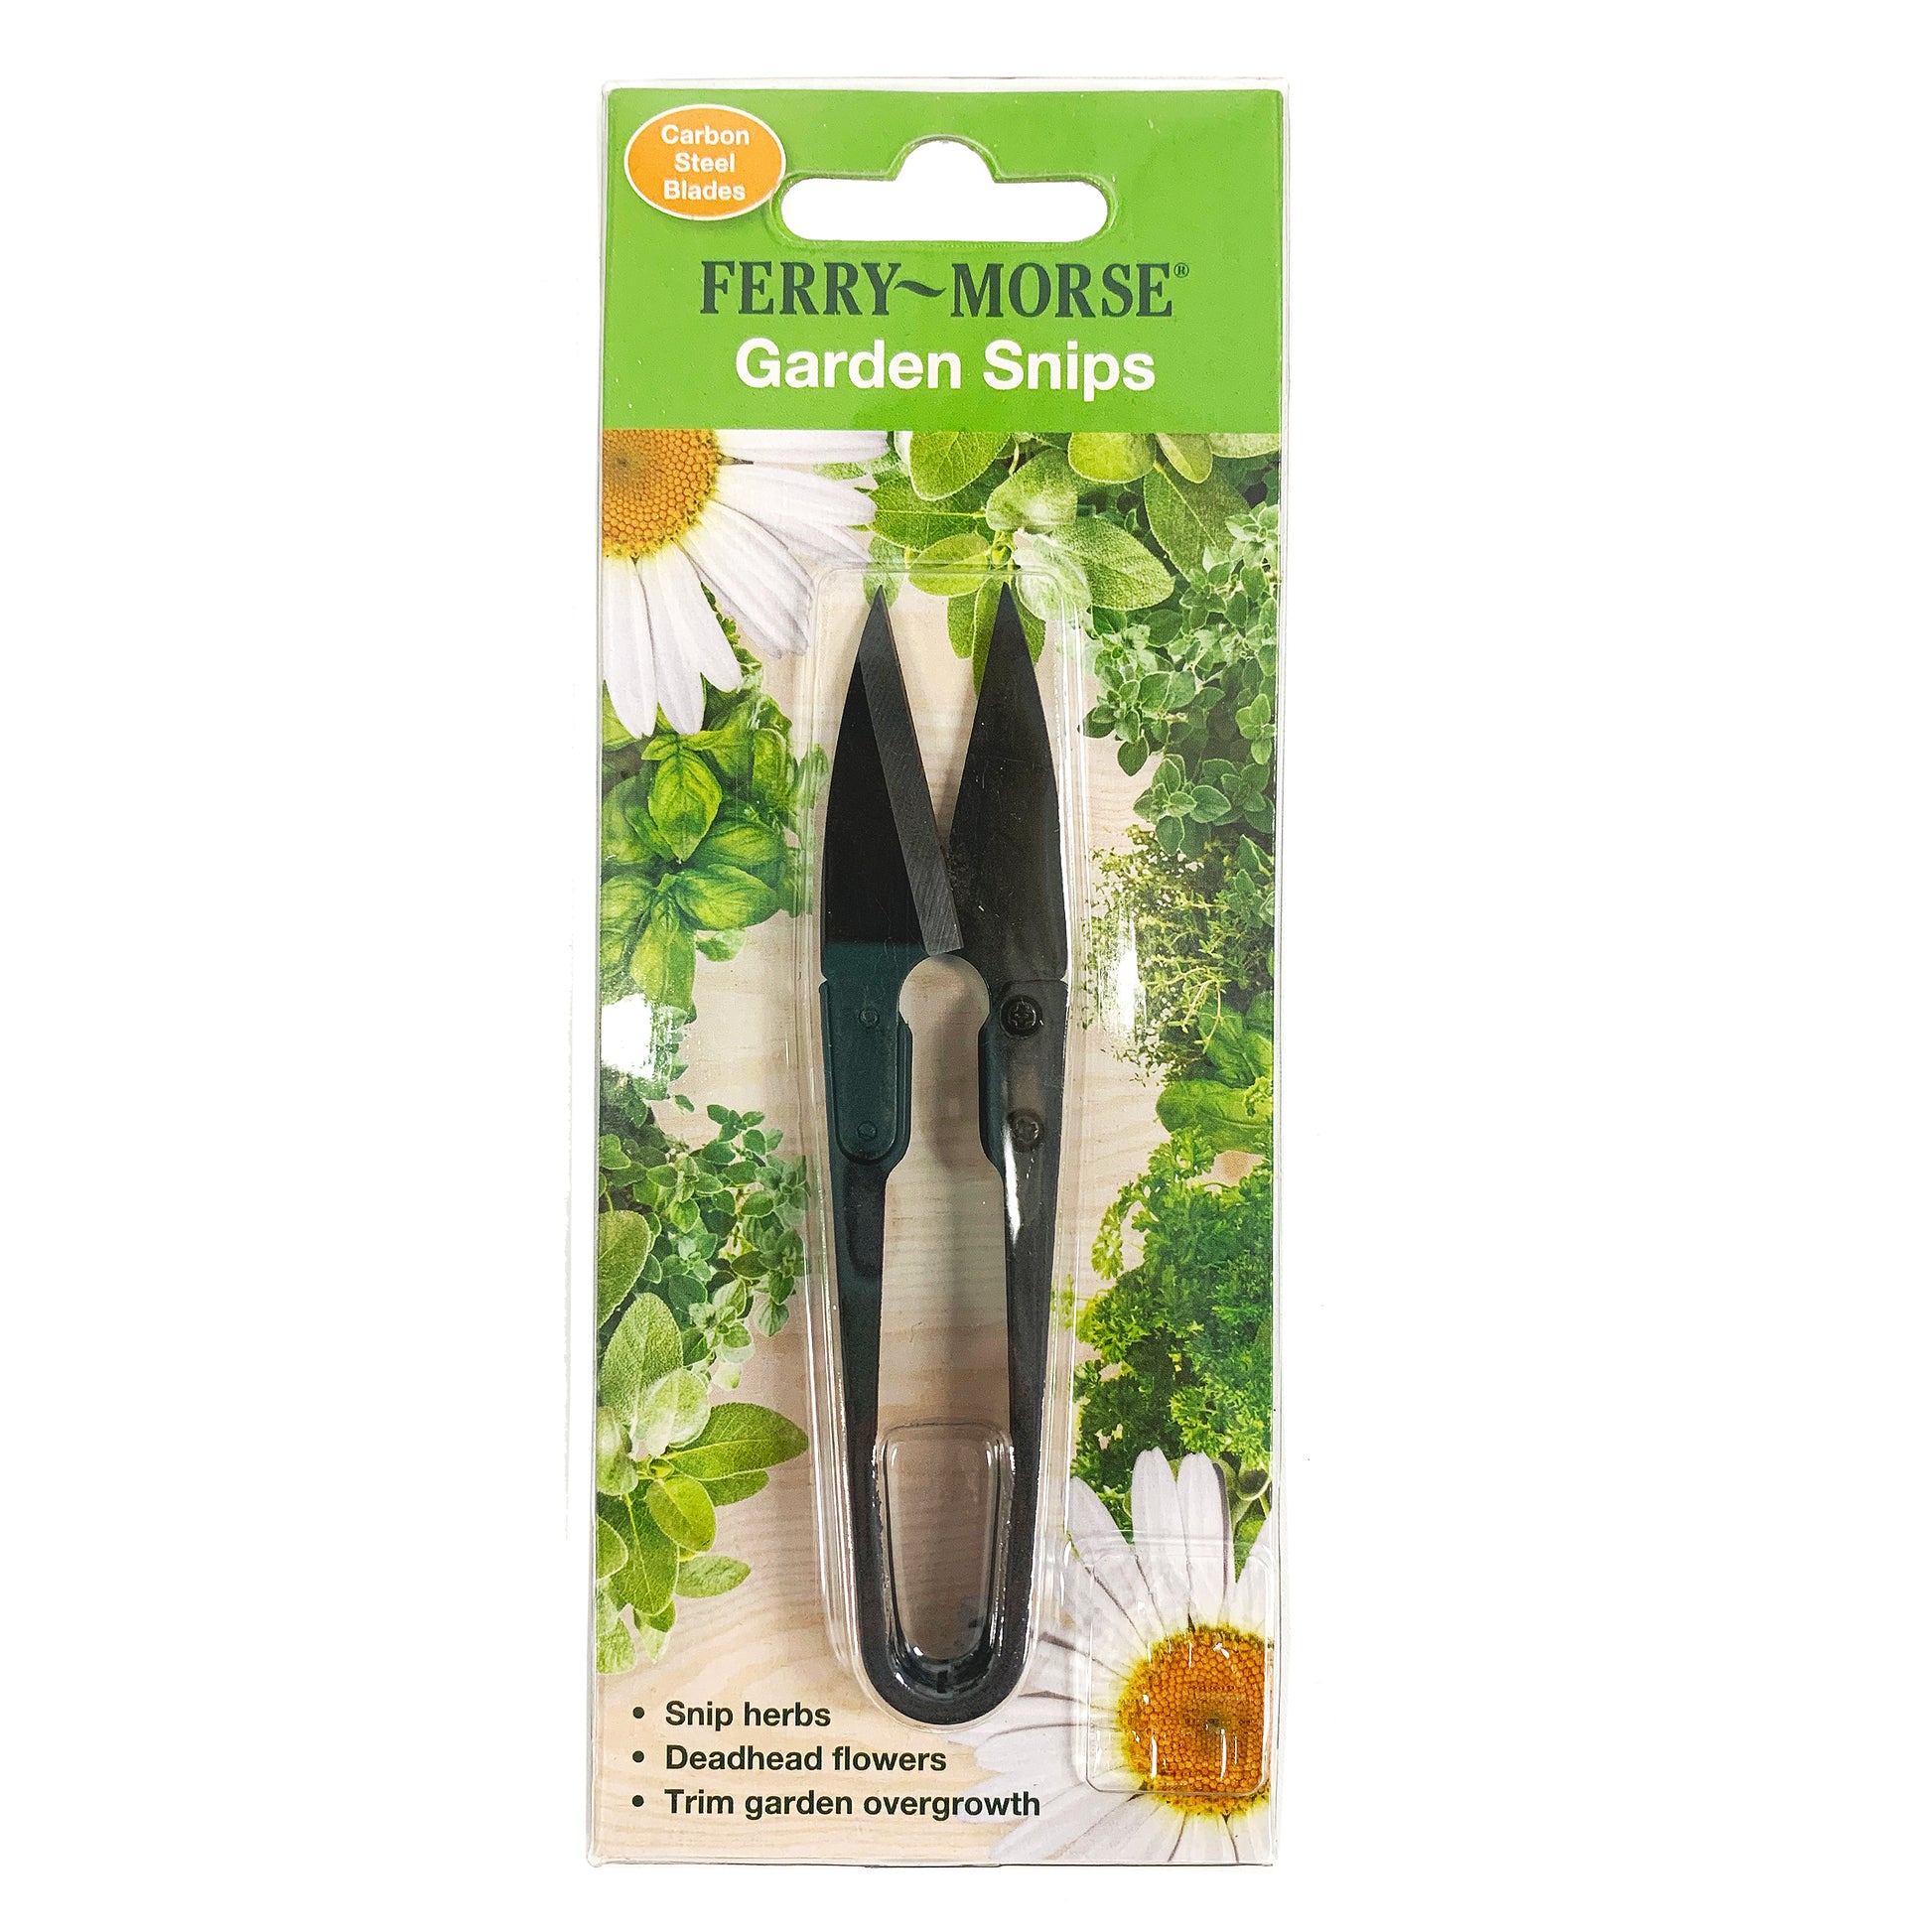 Ferry-Morse Carbon Steel Garden Snipping Scissors, front of packaging.